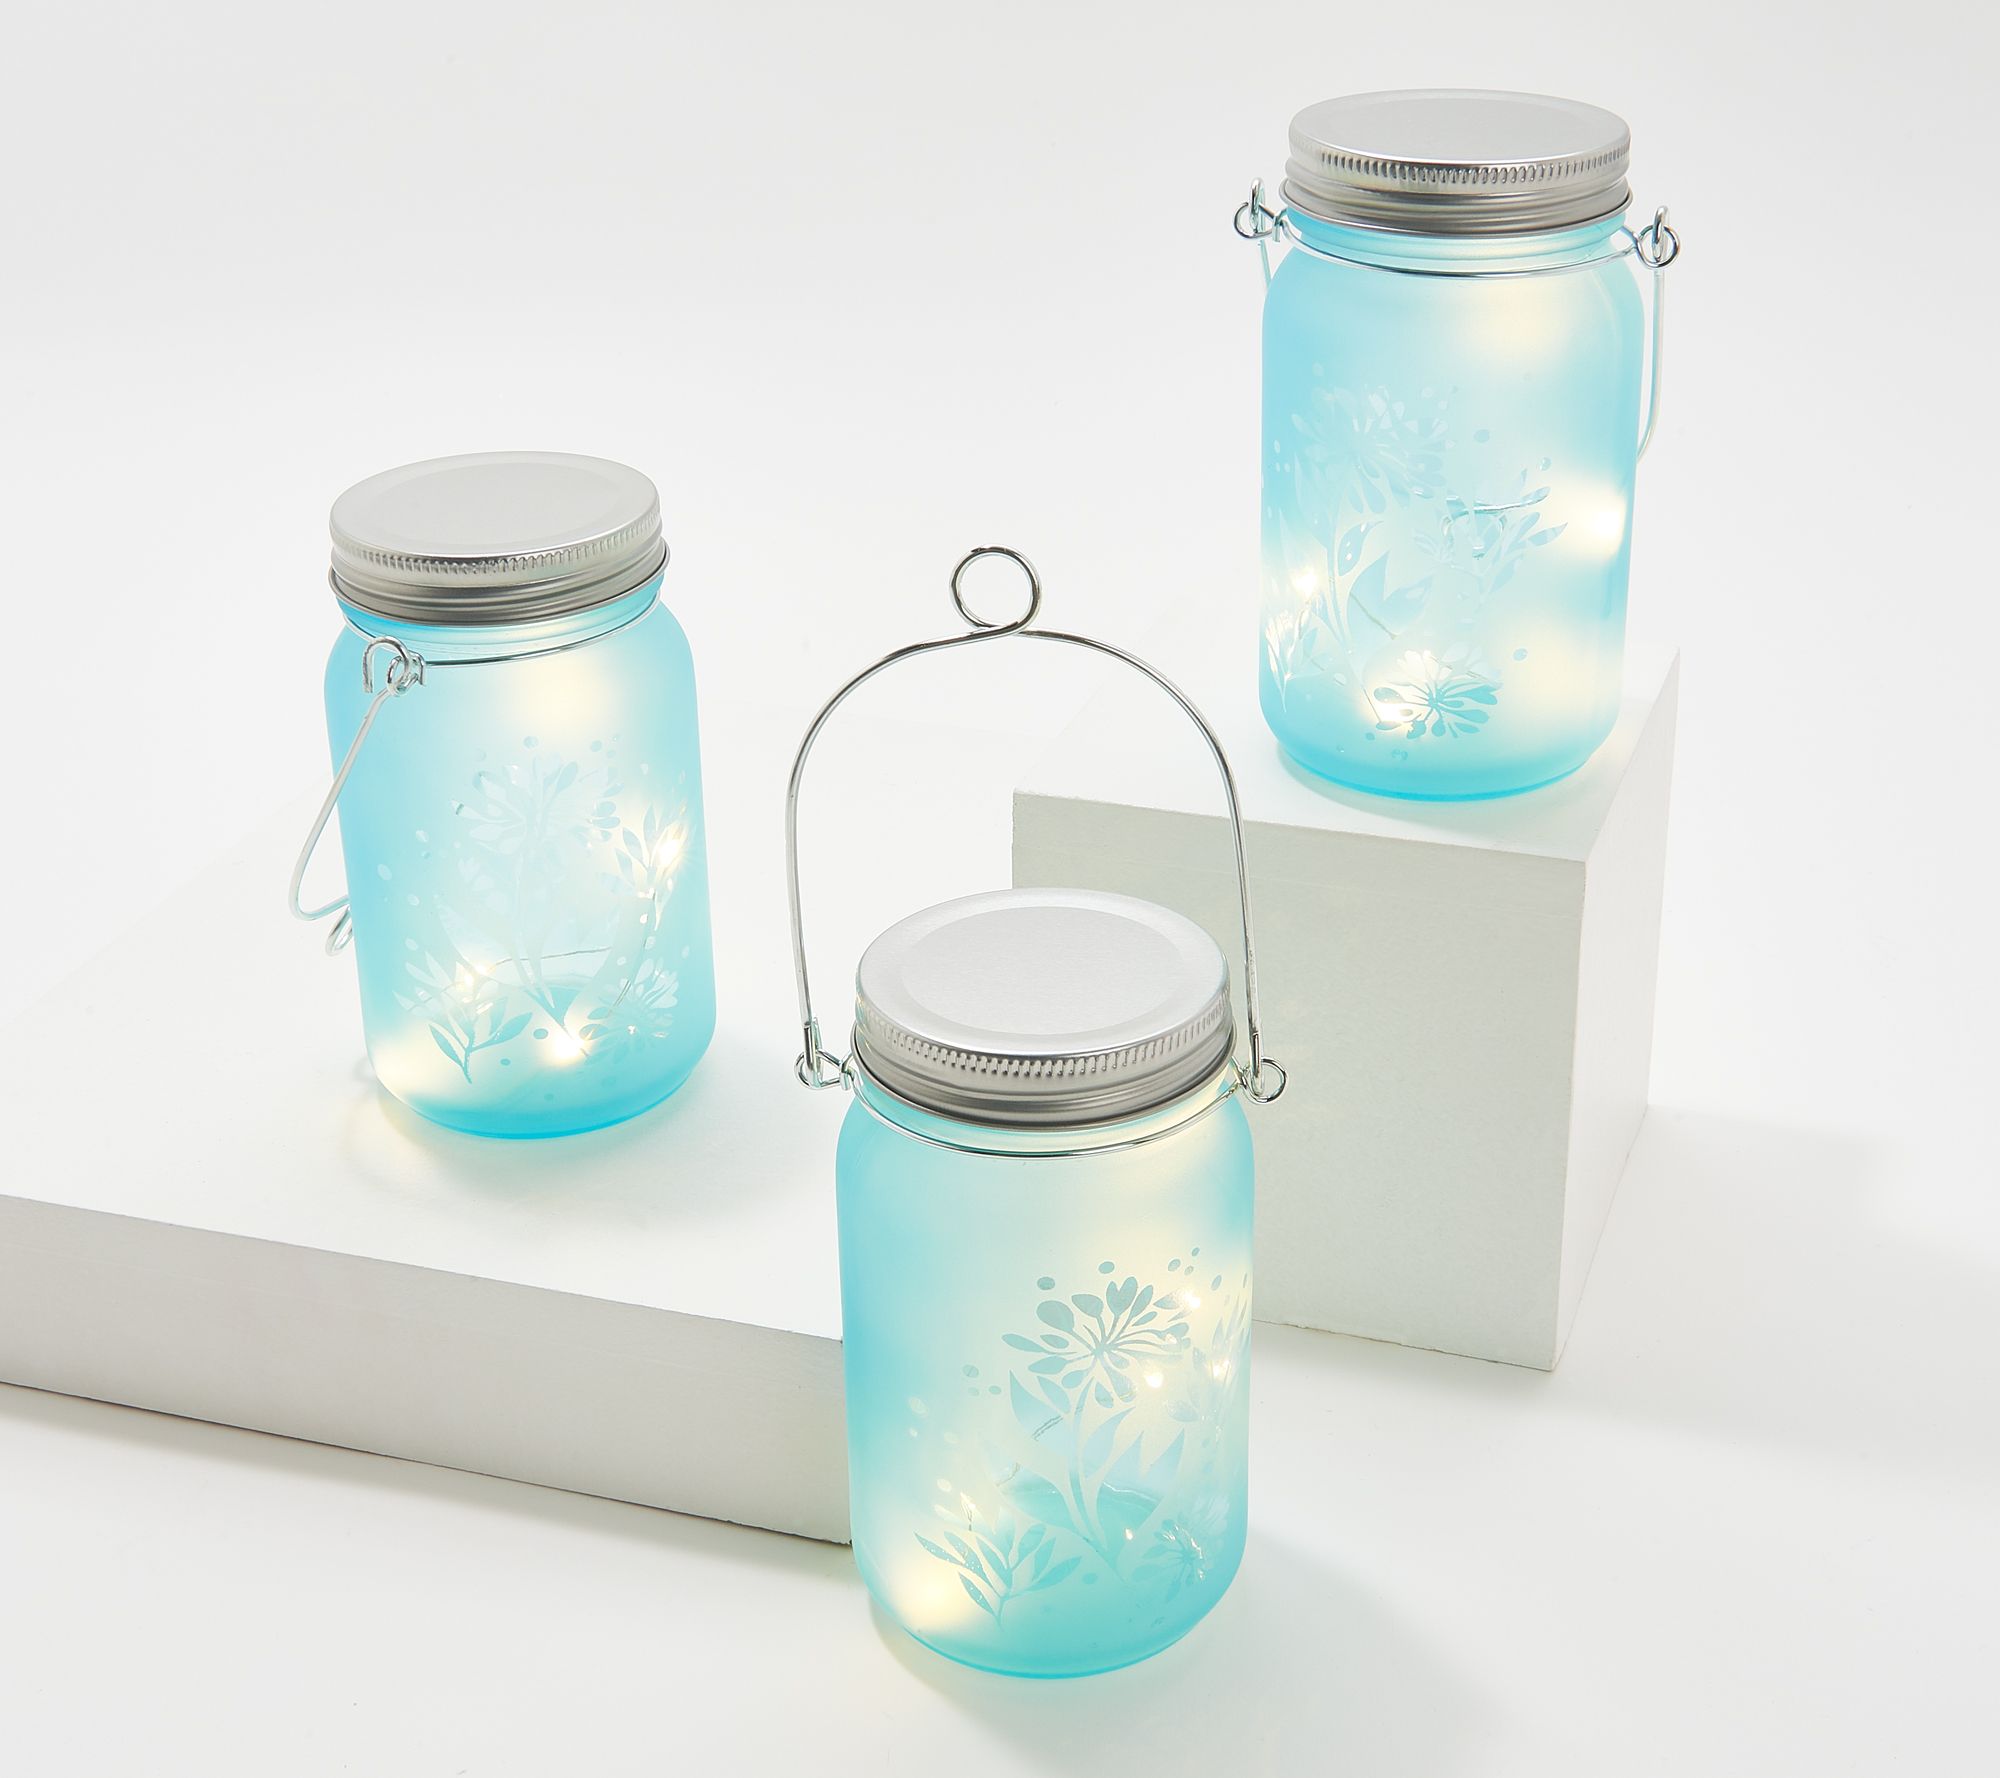 Valerie Parr Hill Lighted Mercury Glass Mason Jar NEW Assorted Colors!